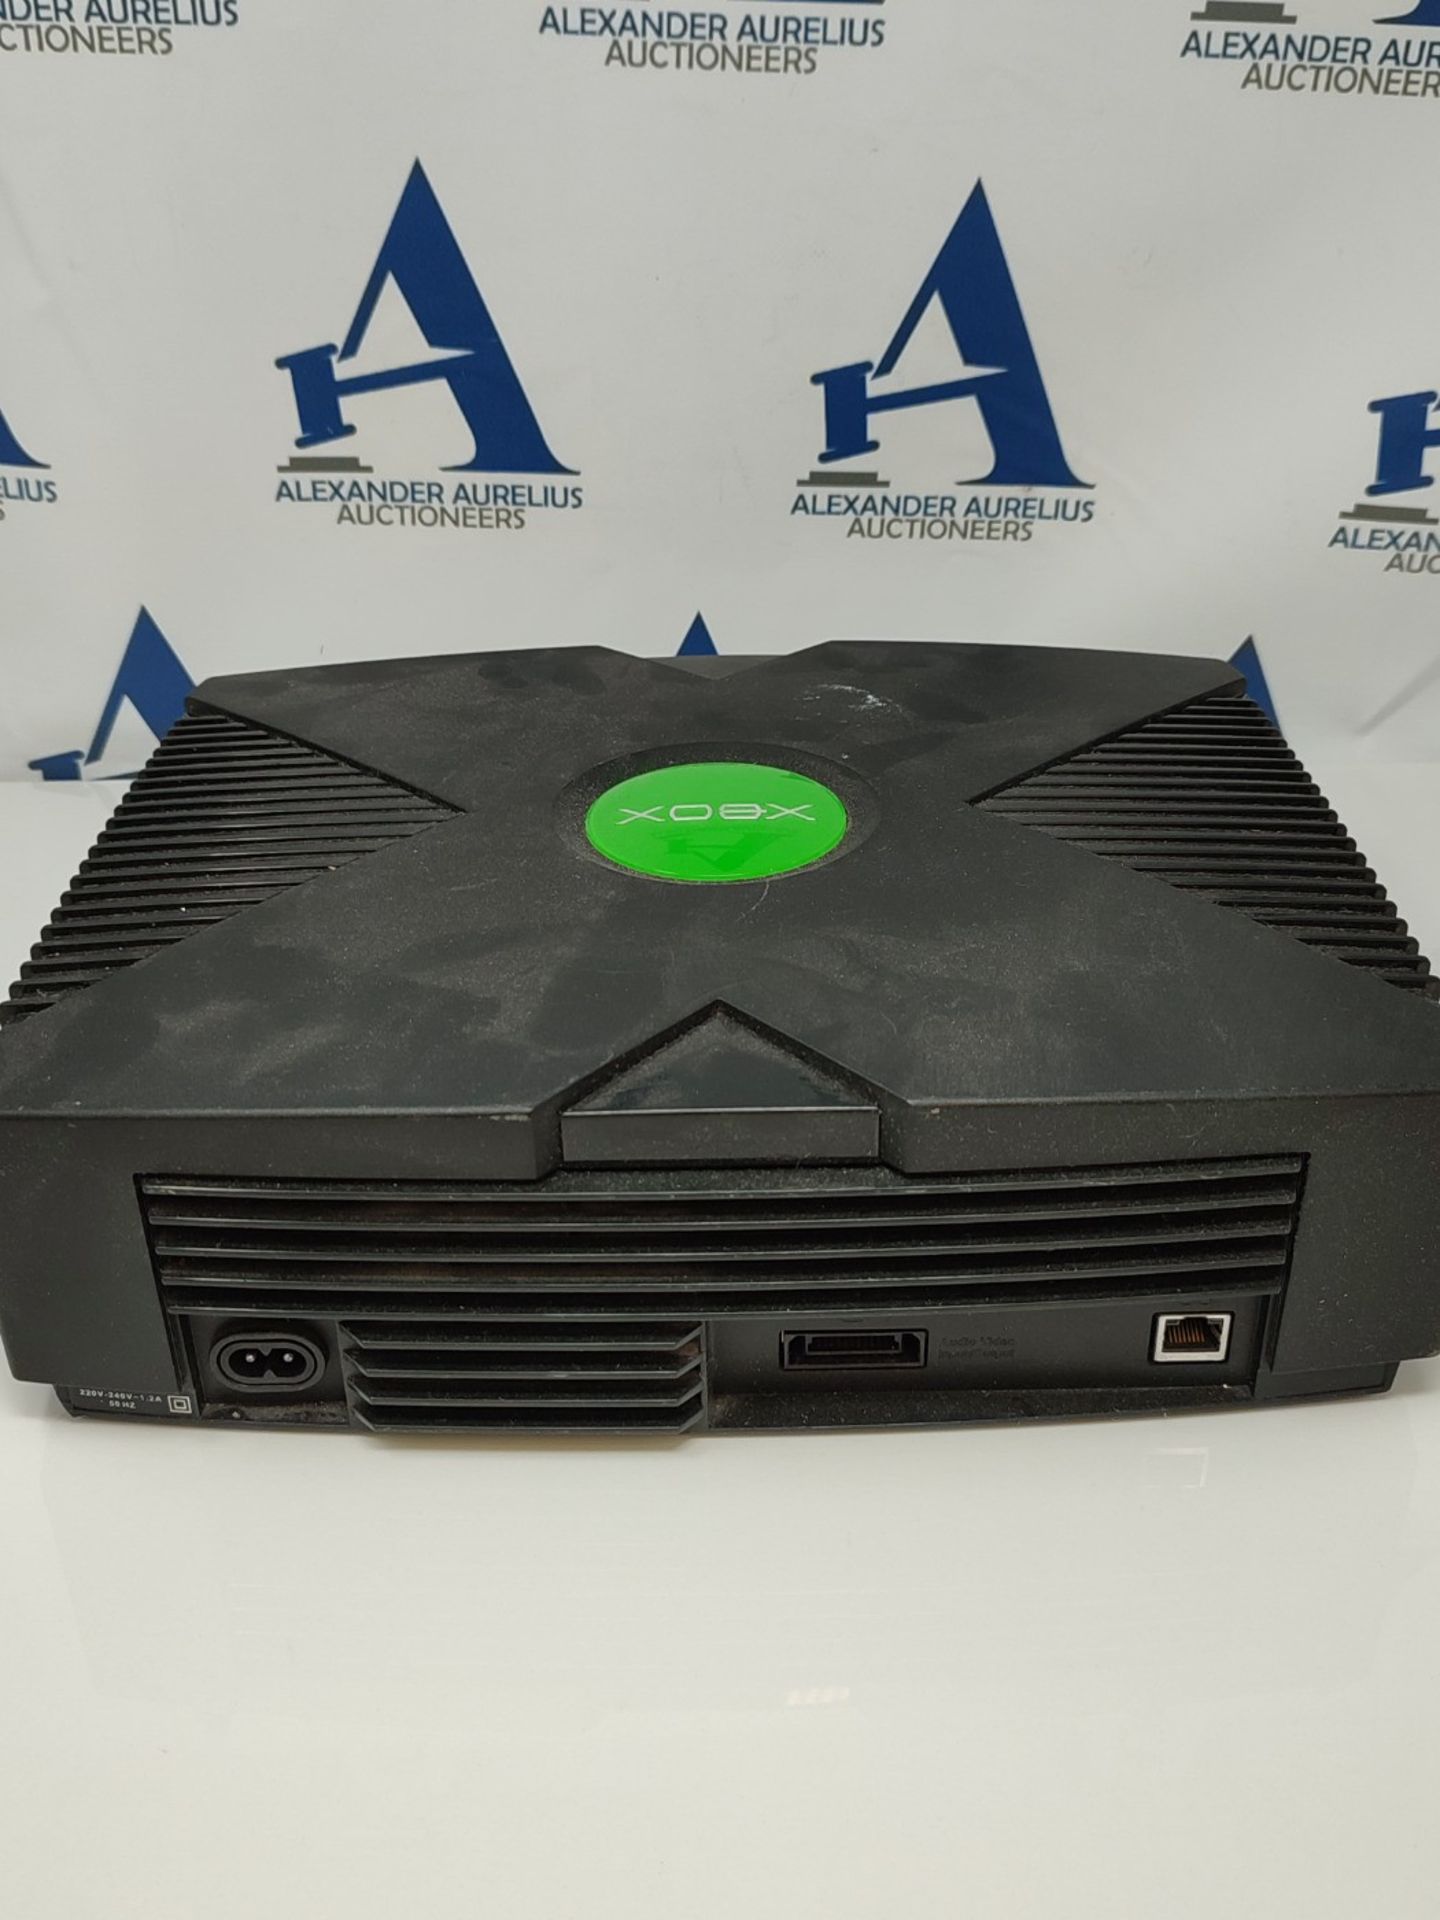 Microsoft Xbox WA 98052-6399 Black Dolby Digital Home Video Gaming Console Only - Image 2 of 2